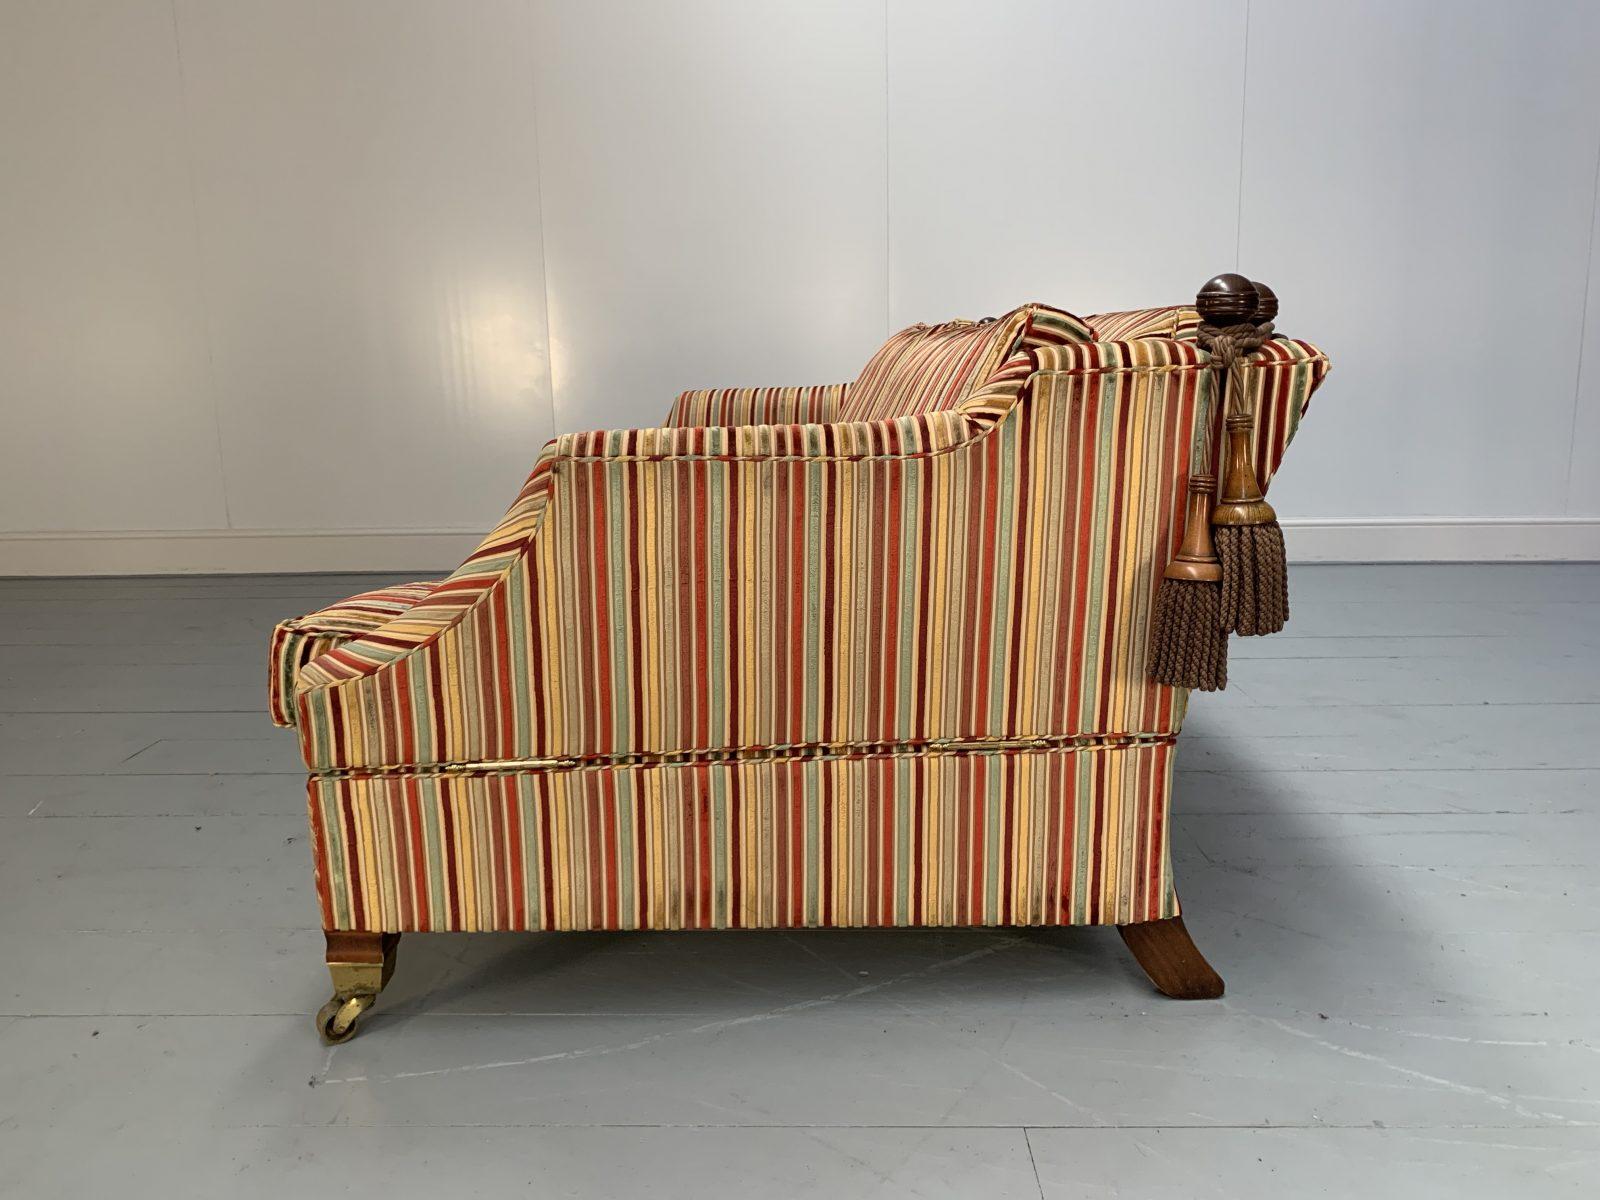 Duresta “Hornblower” Large 2.5-Seat Sofa in Striped Velvet Fabric In Good Condition For Sale In Barrowford, GB